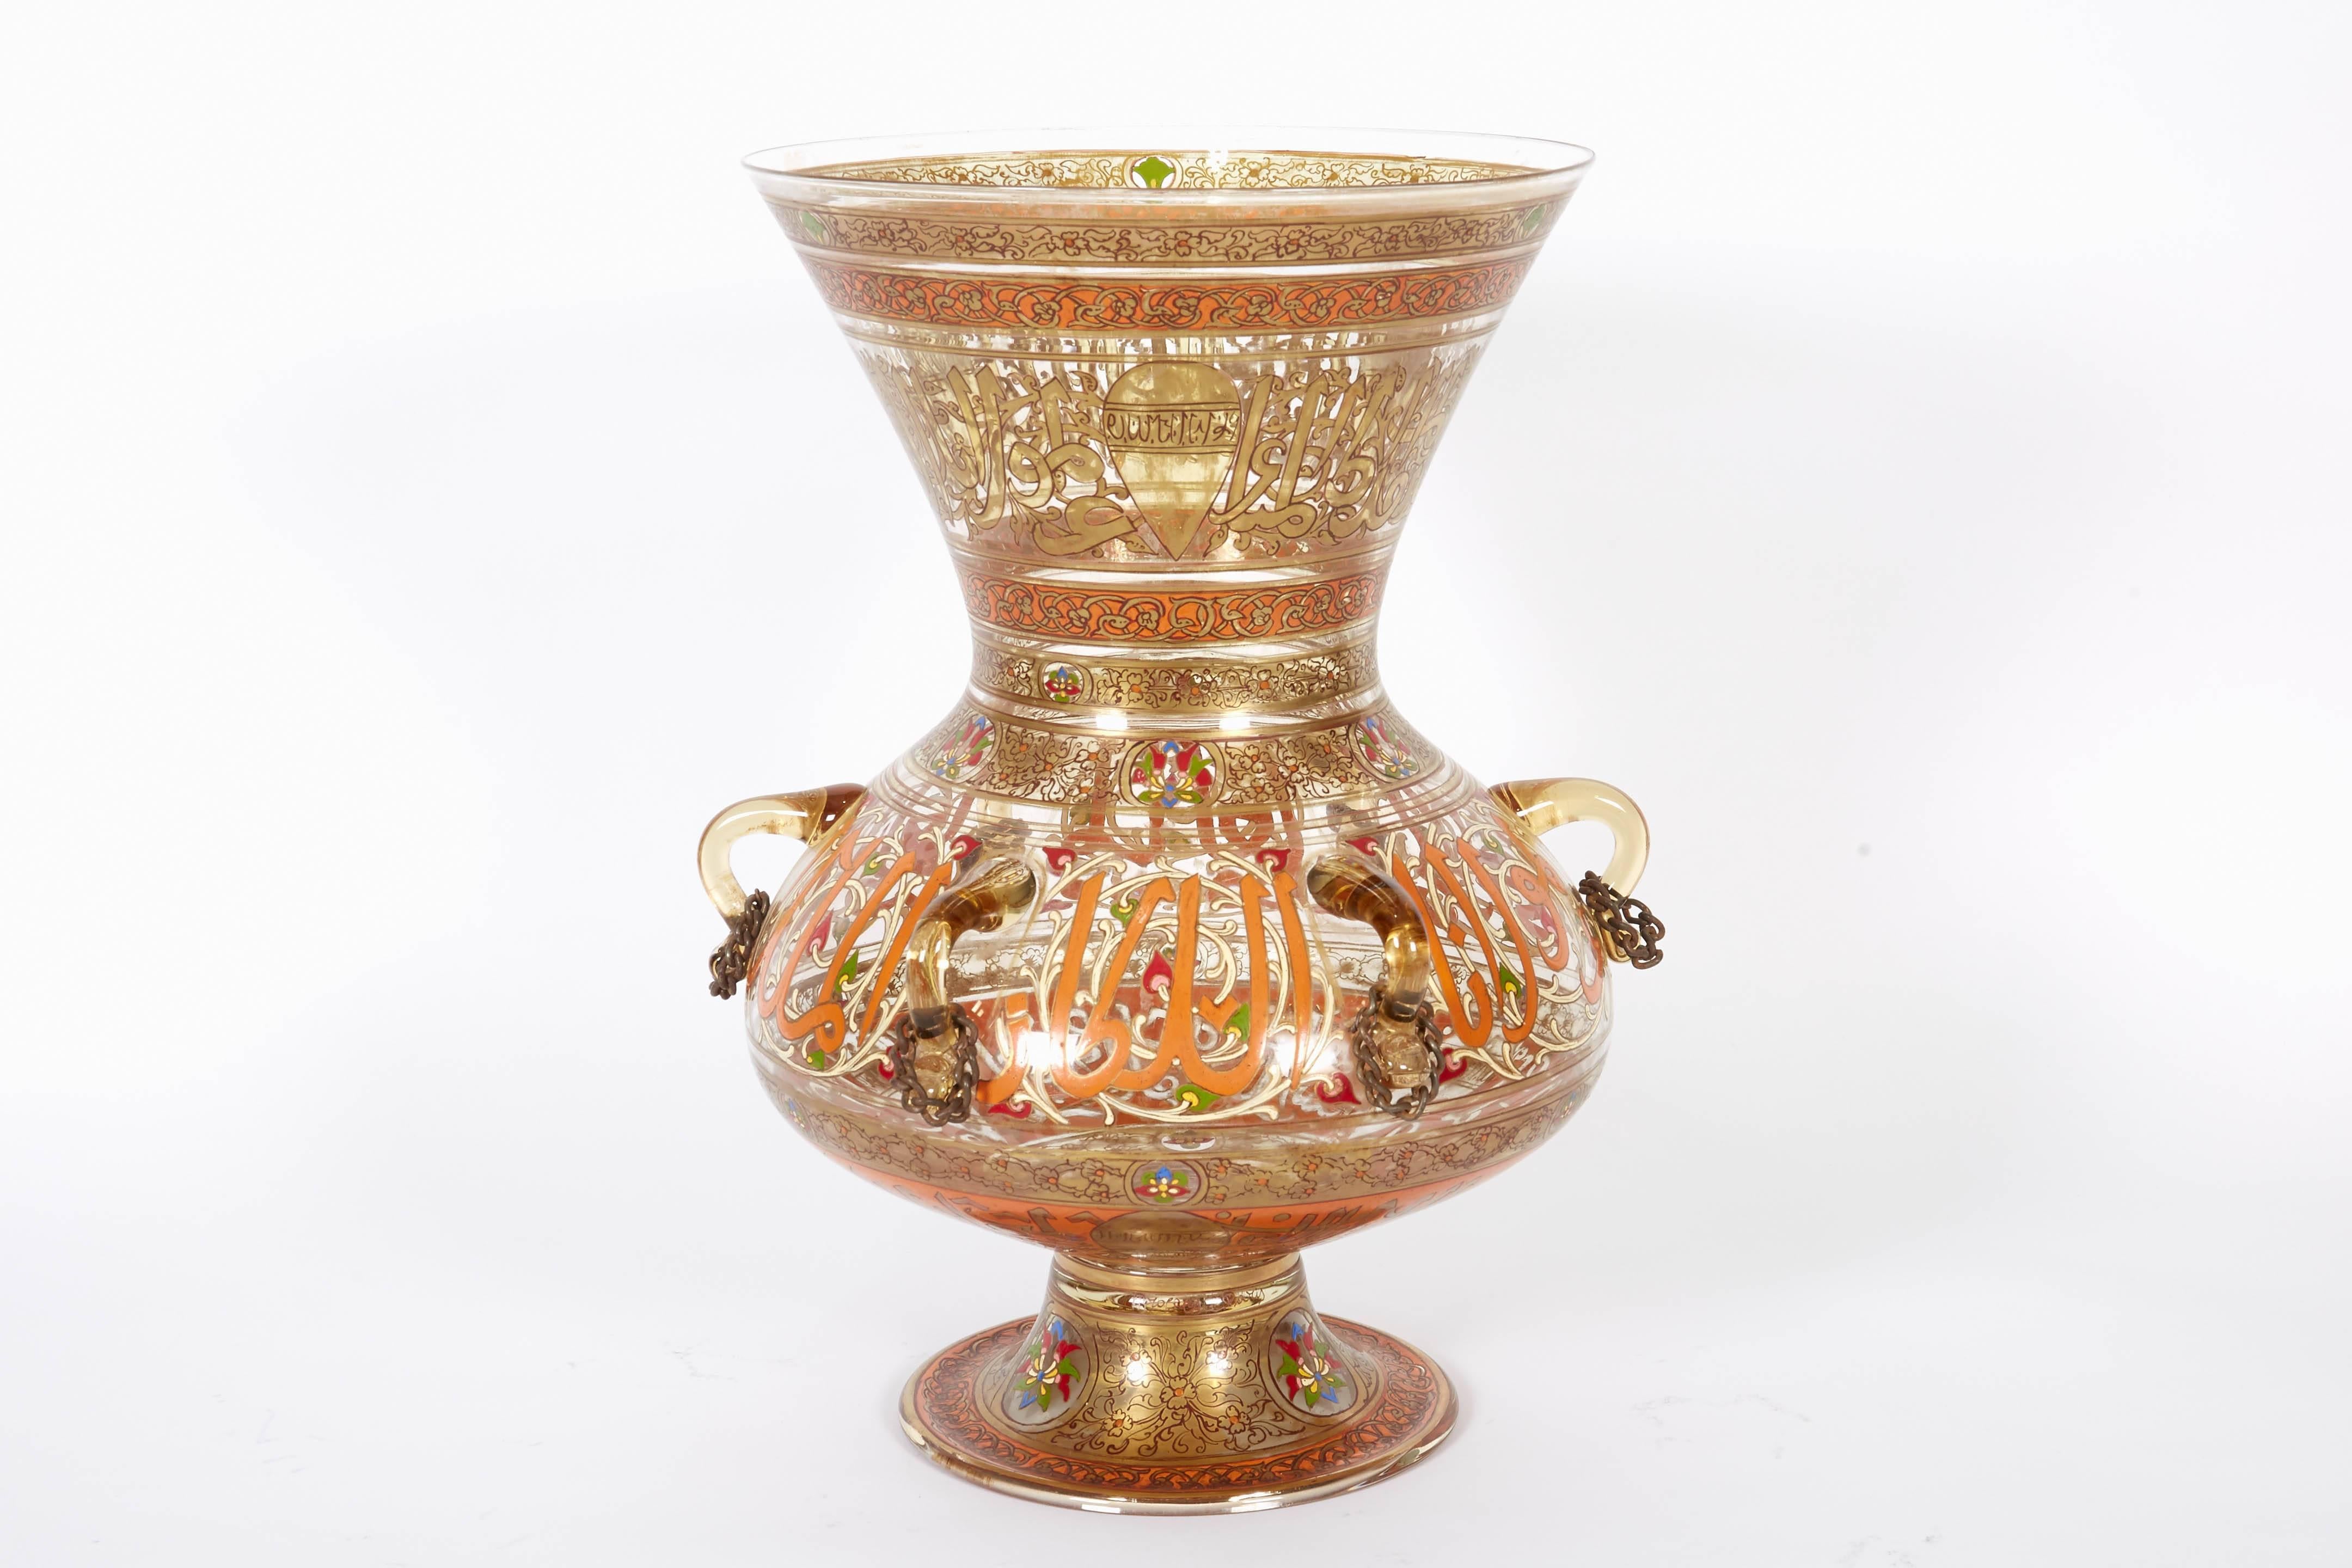 A rare French enameled Mamluk Revival (Islamic) glass mosque lamp / lantern by Philippe-Joseph Brocard, late 19th century.

Measures: 14